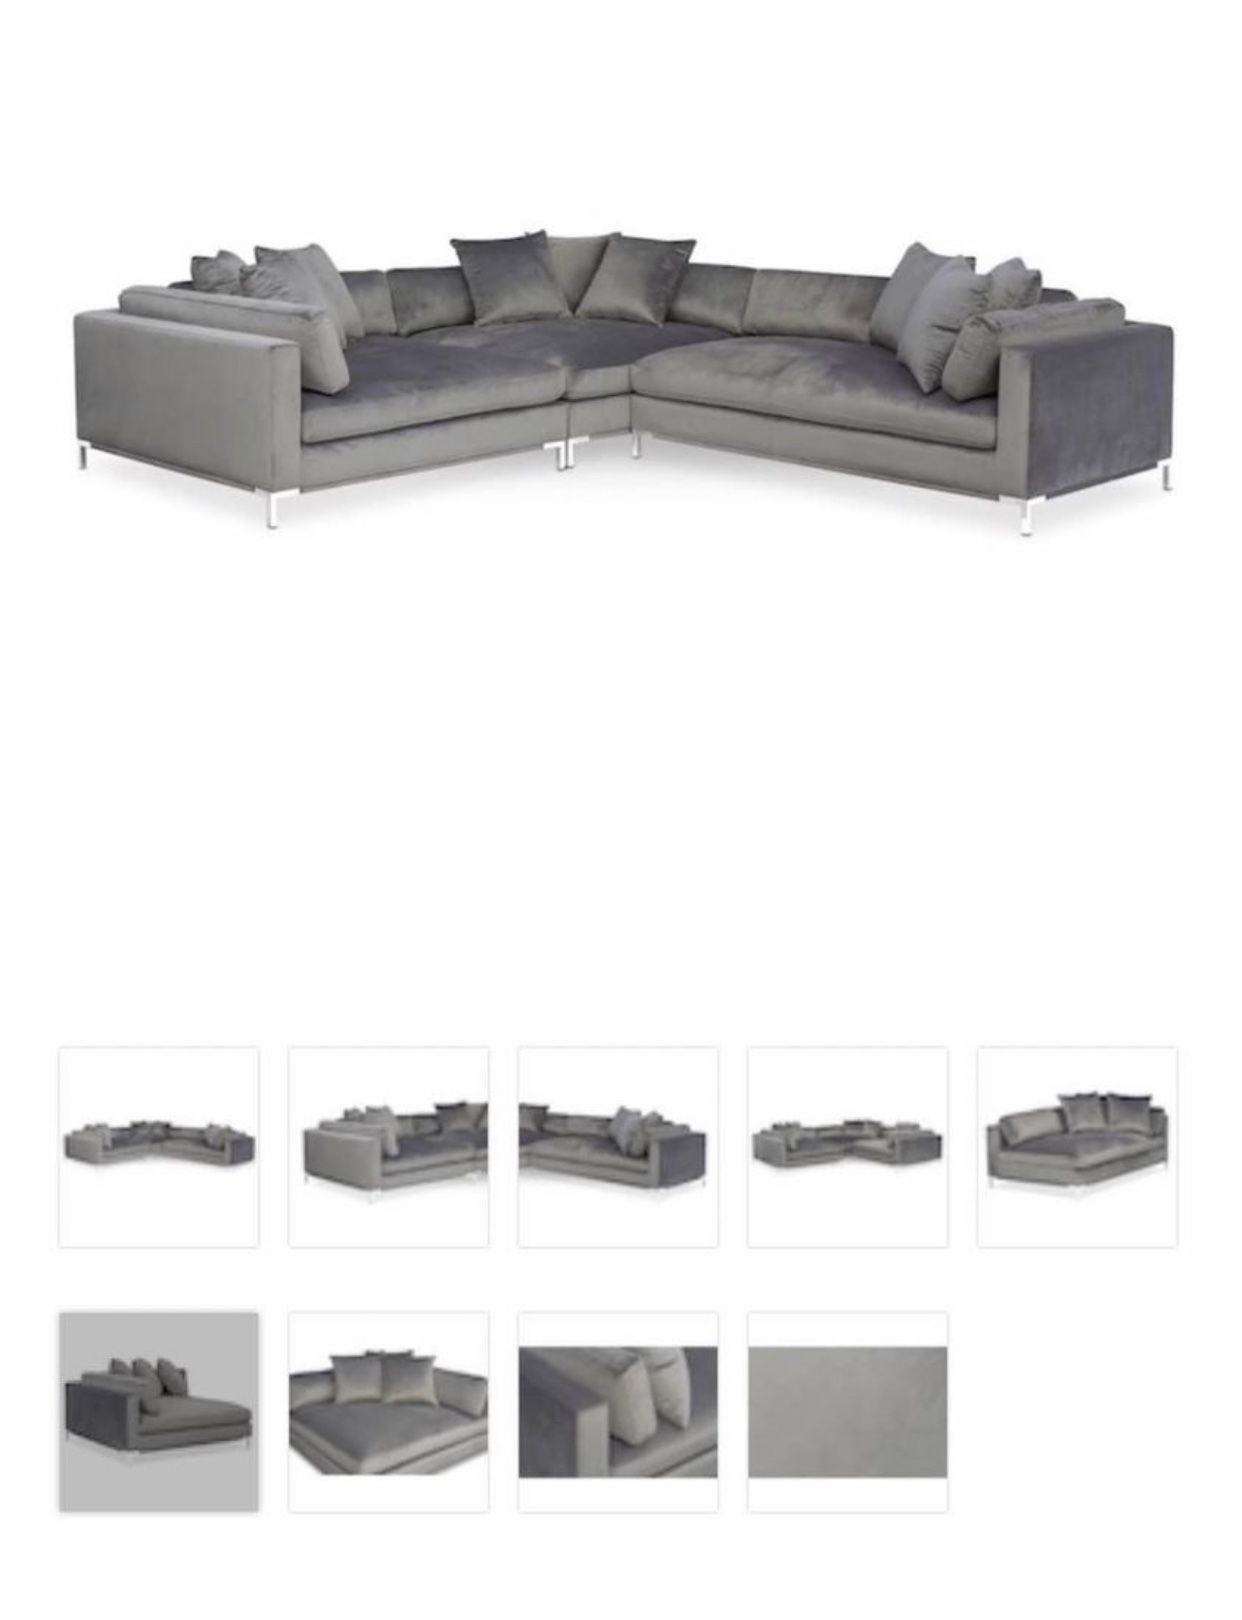 AMERICAN SIGNATURE OVERSIZED SECTIONAL (RETAIL $2000) MY LOST YOUR GAIN 🥺|MOVING|